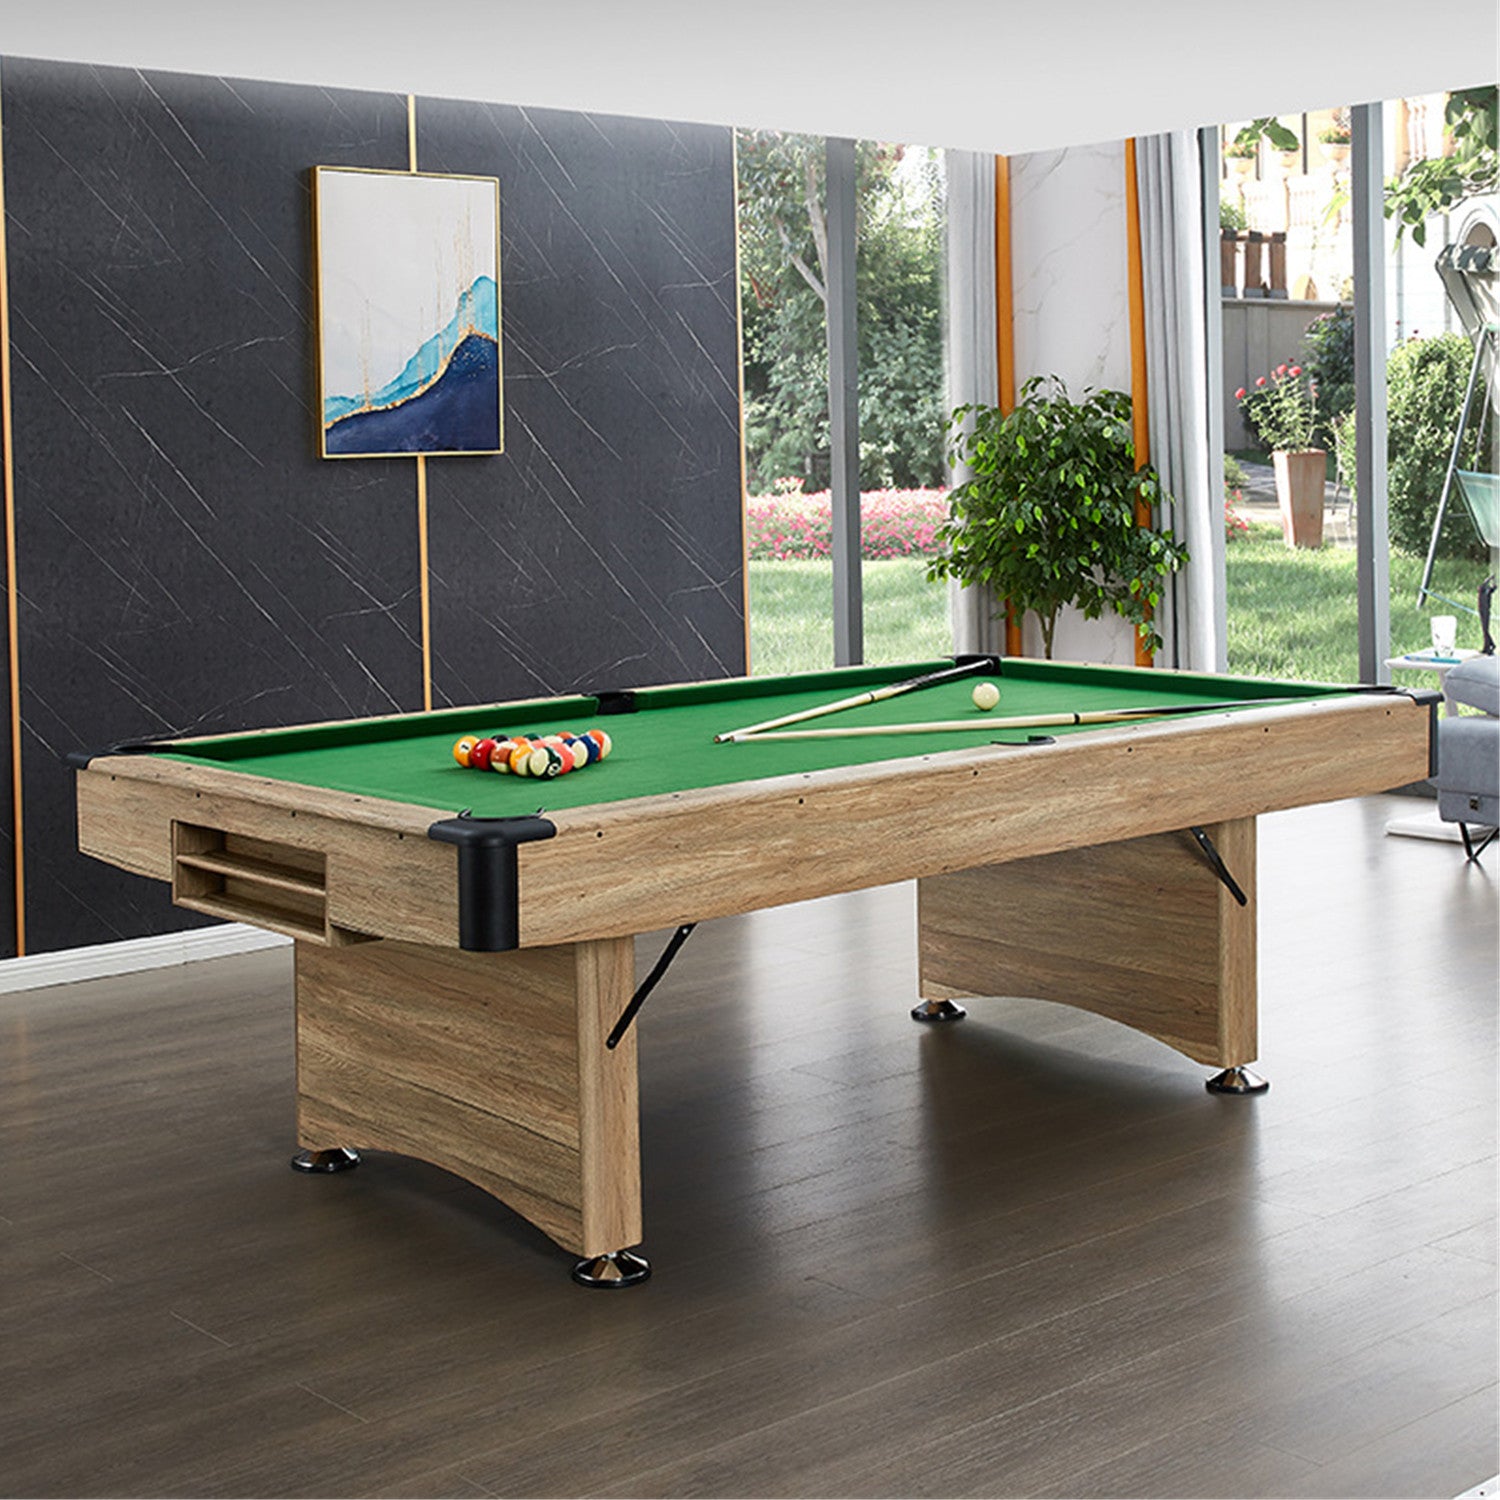 Bosco 7FT Dining Pool Table-3 IN 1 Foldable |No Assembly Required